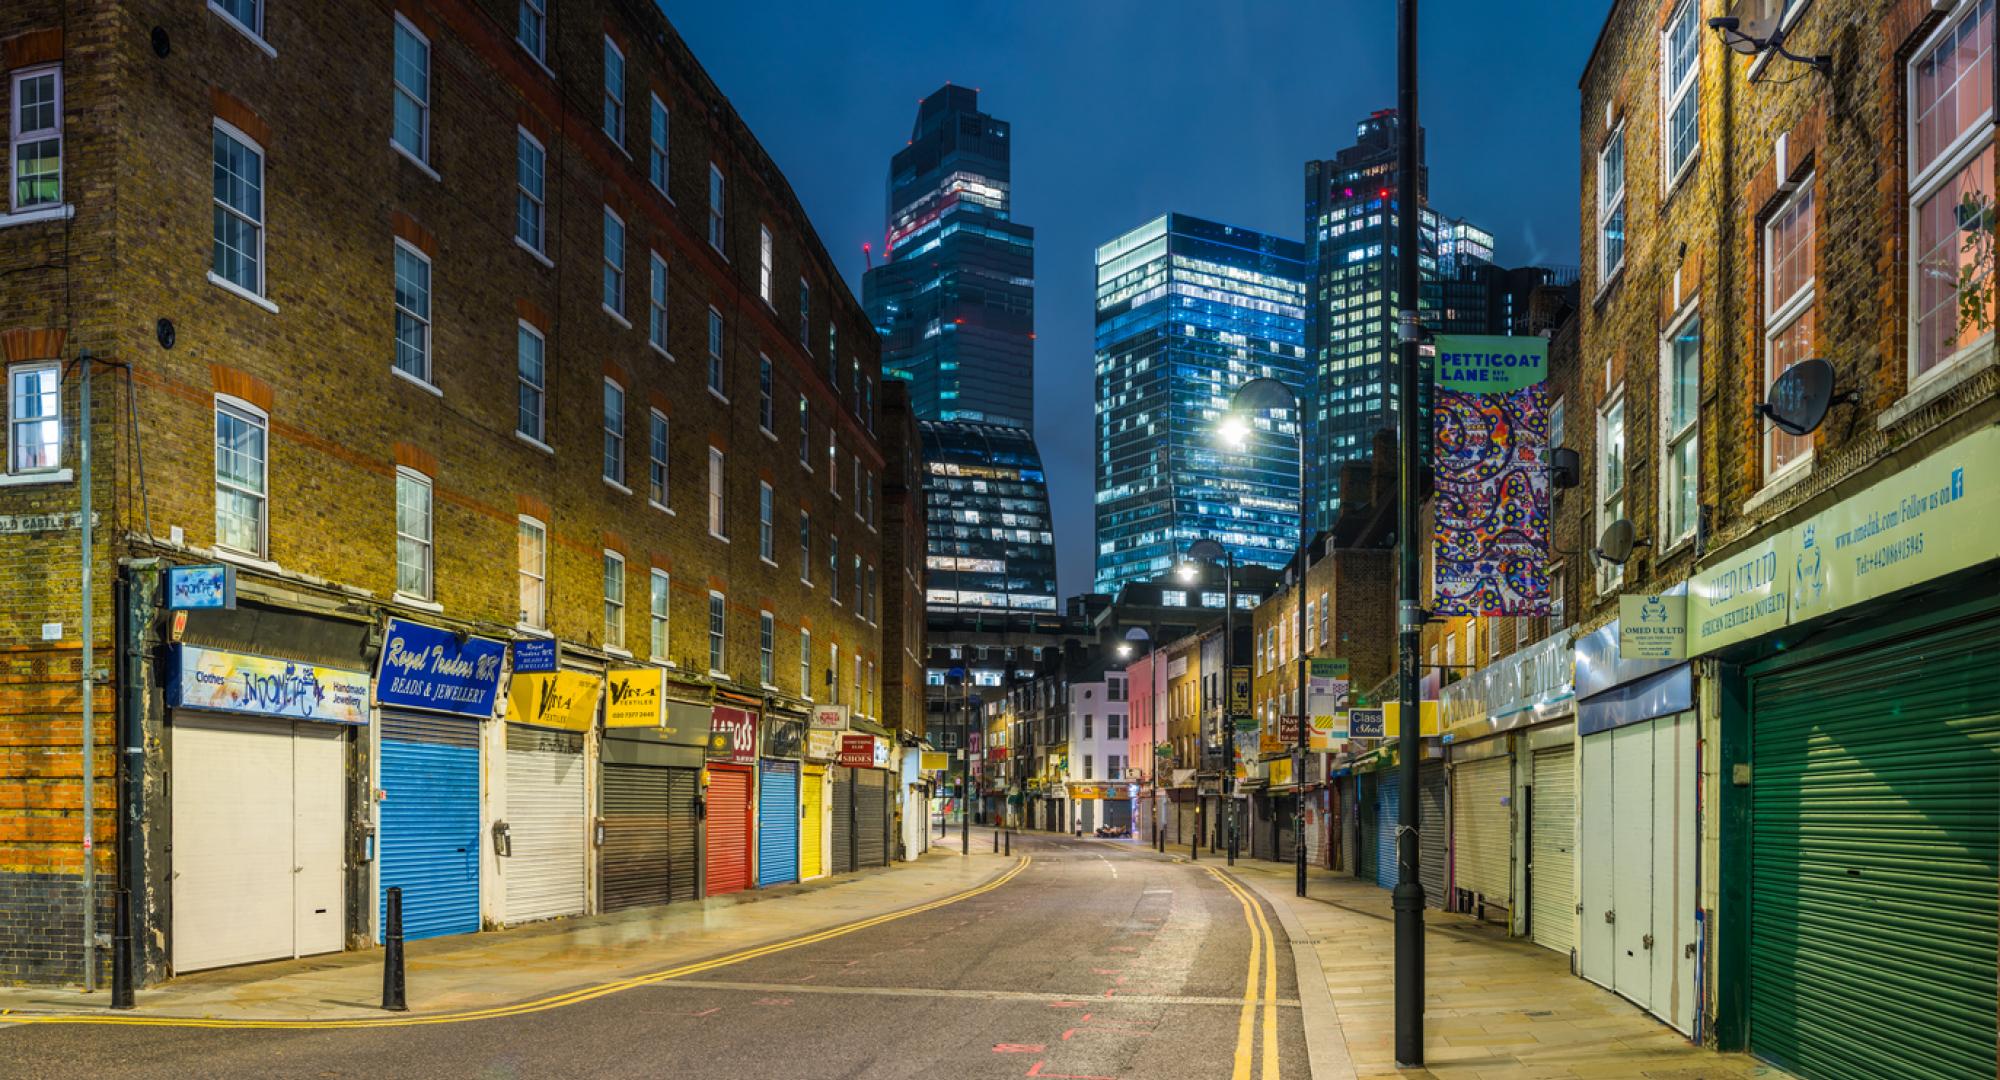 The futuristic towers of the City financial district illuminated at night overlooking the quiet streets and shops of Petticoat Lane Market in Spitafields, London